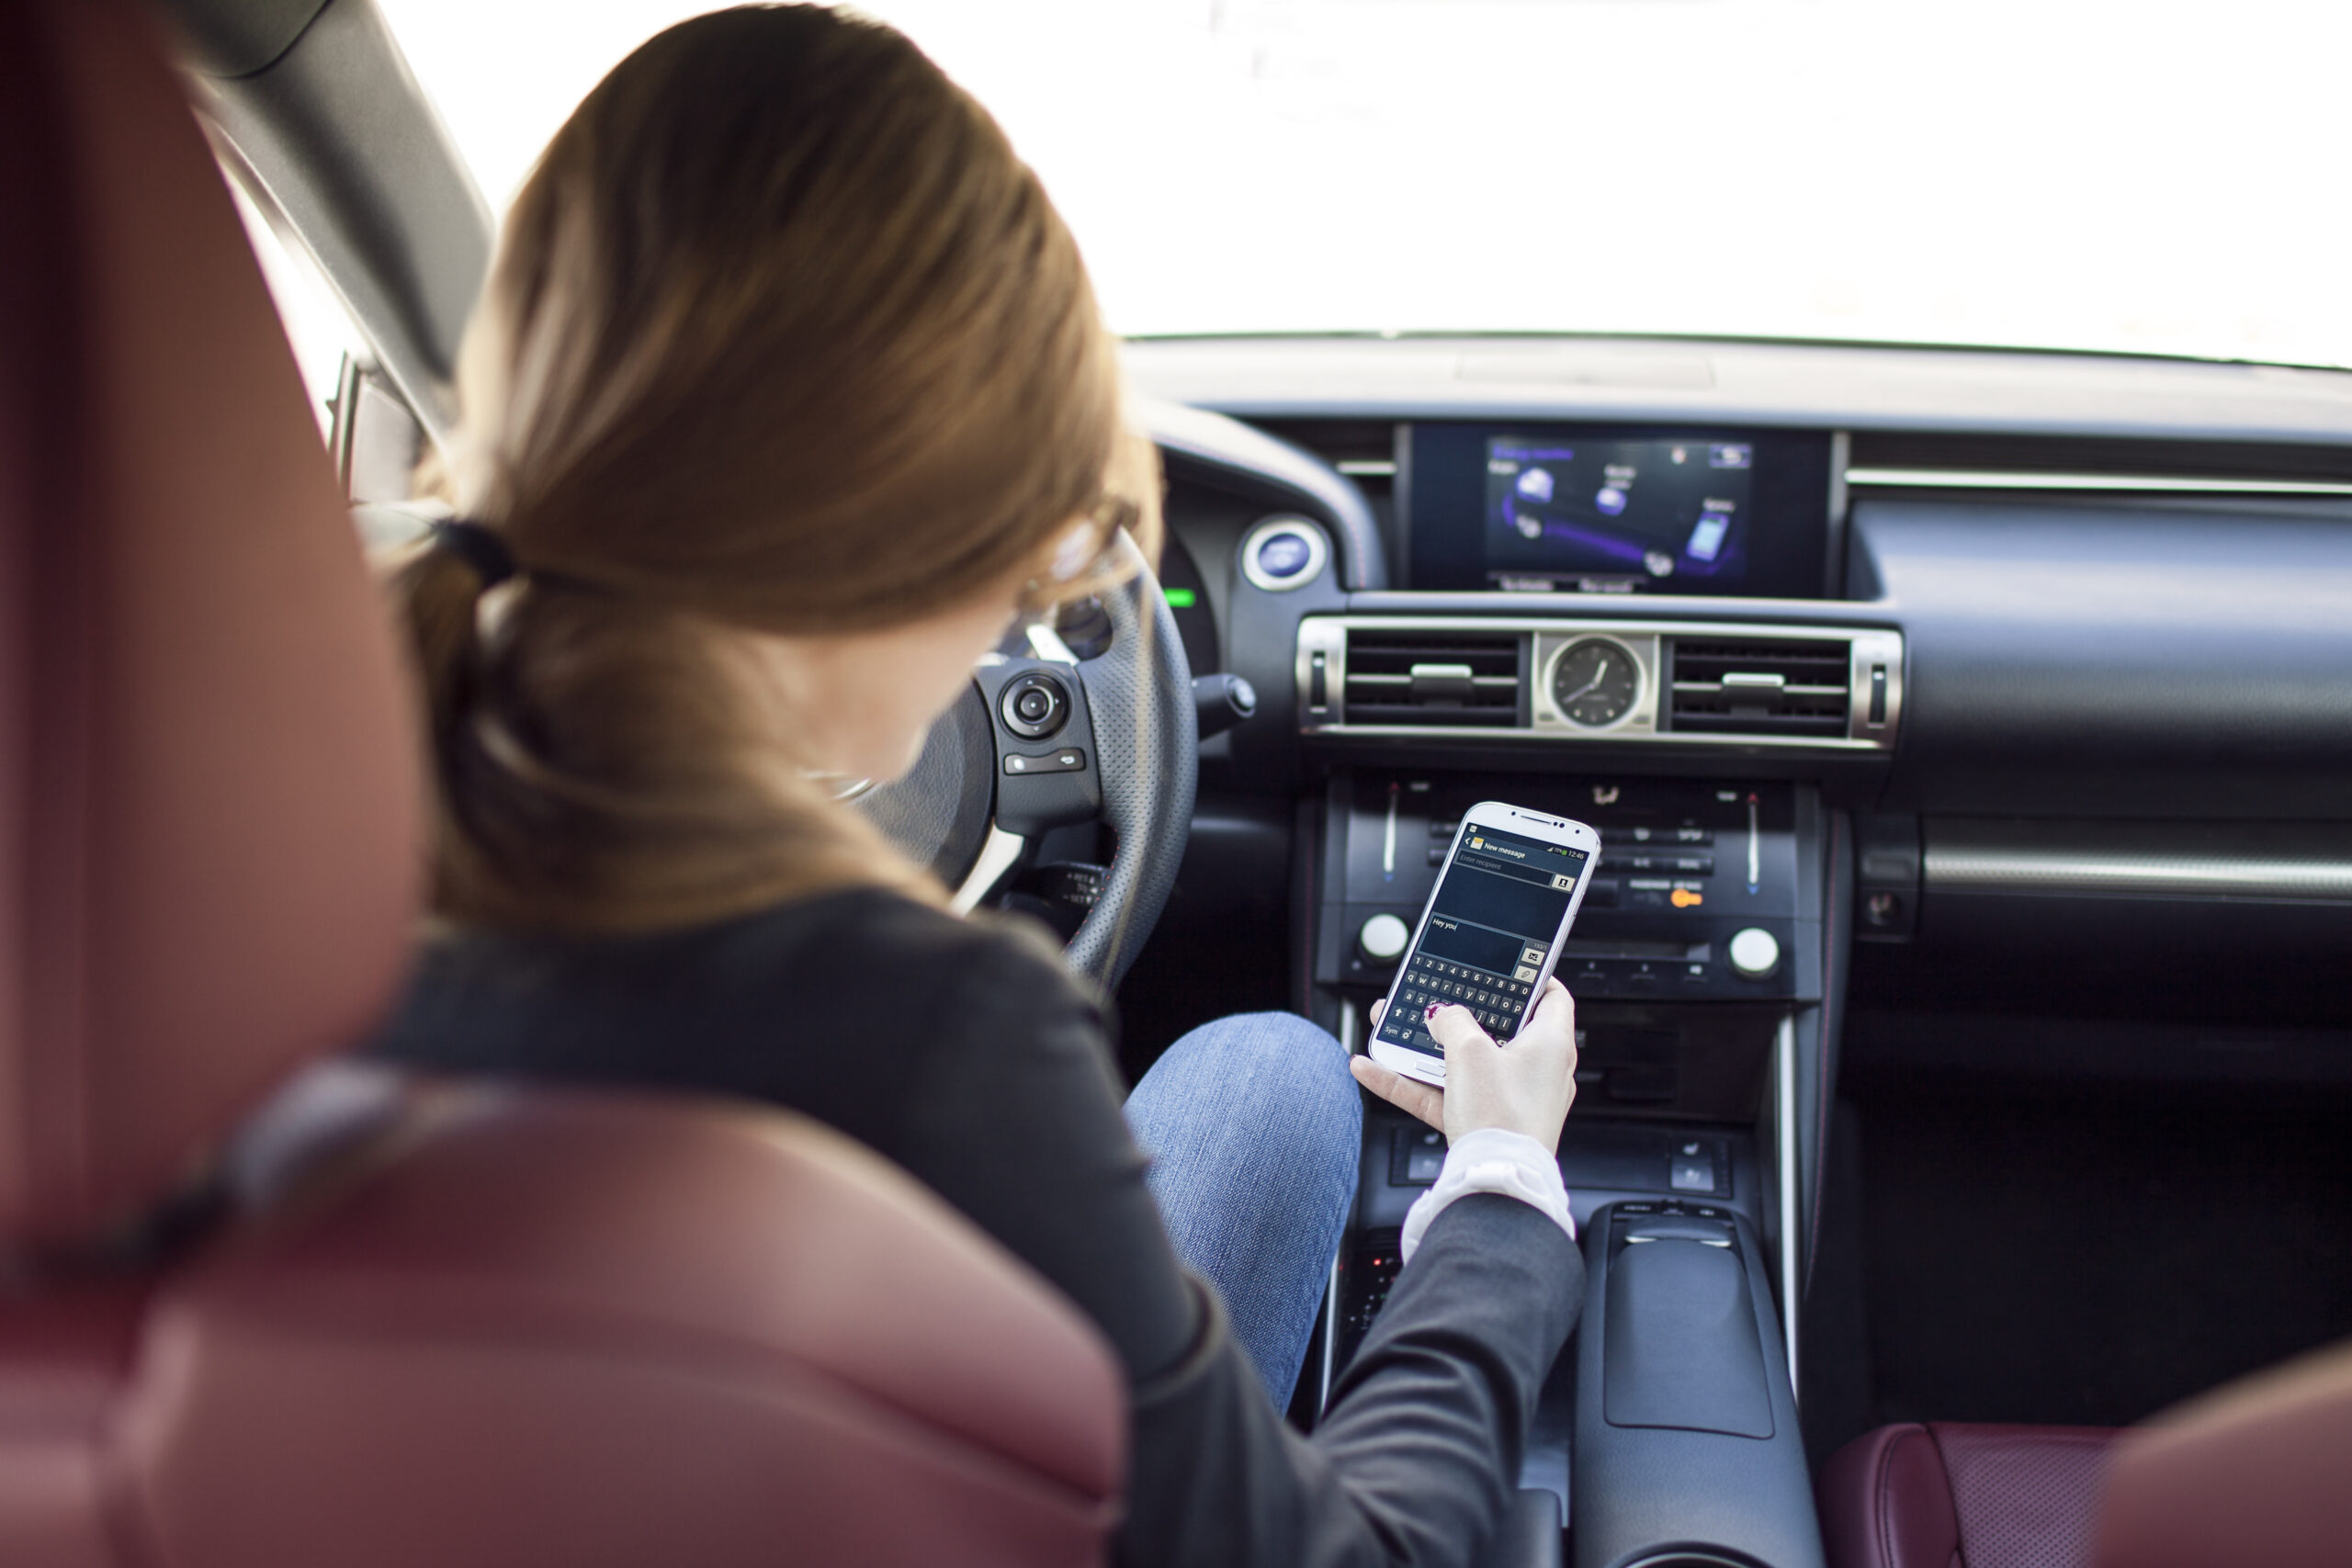 The Dangers of Distracted Driving